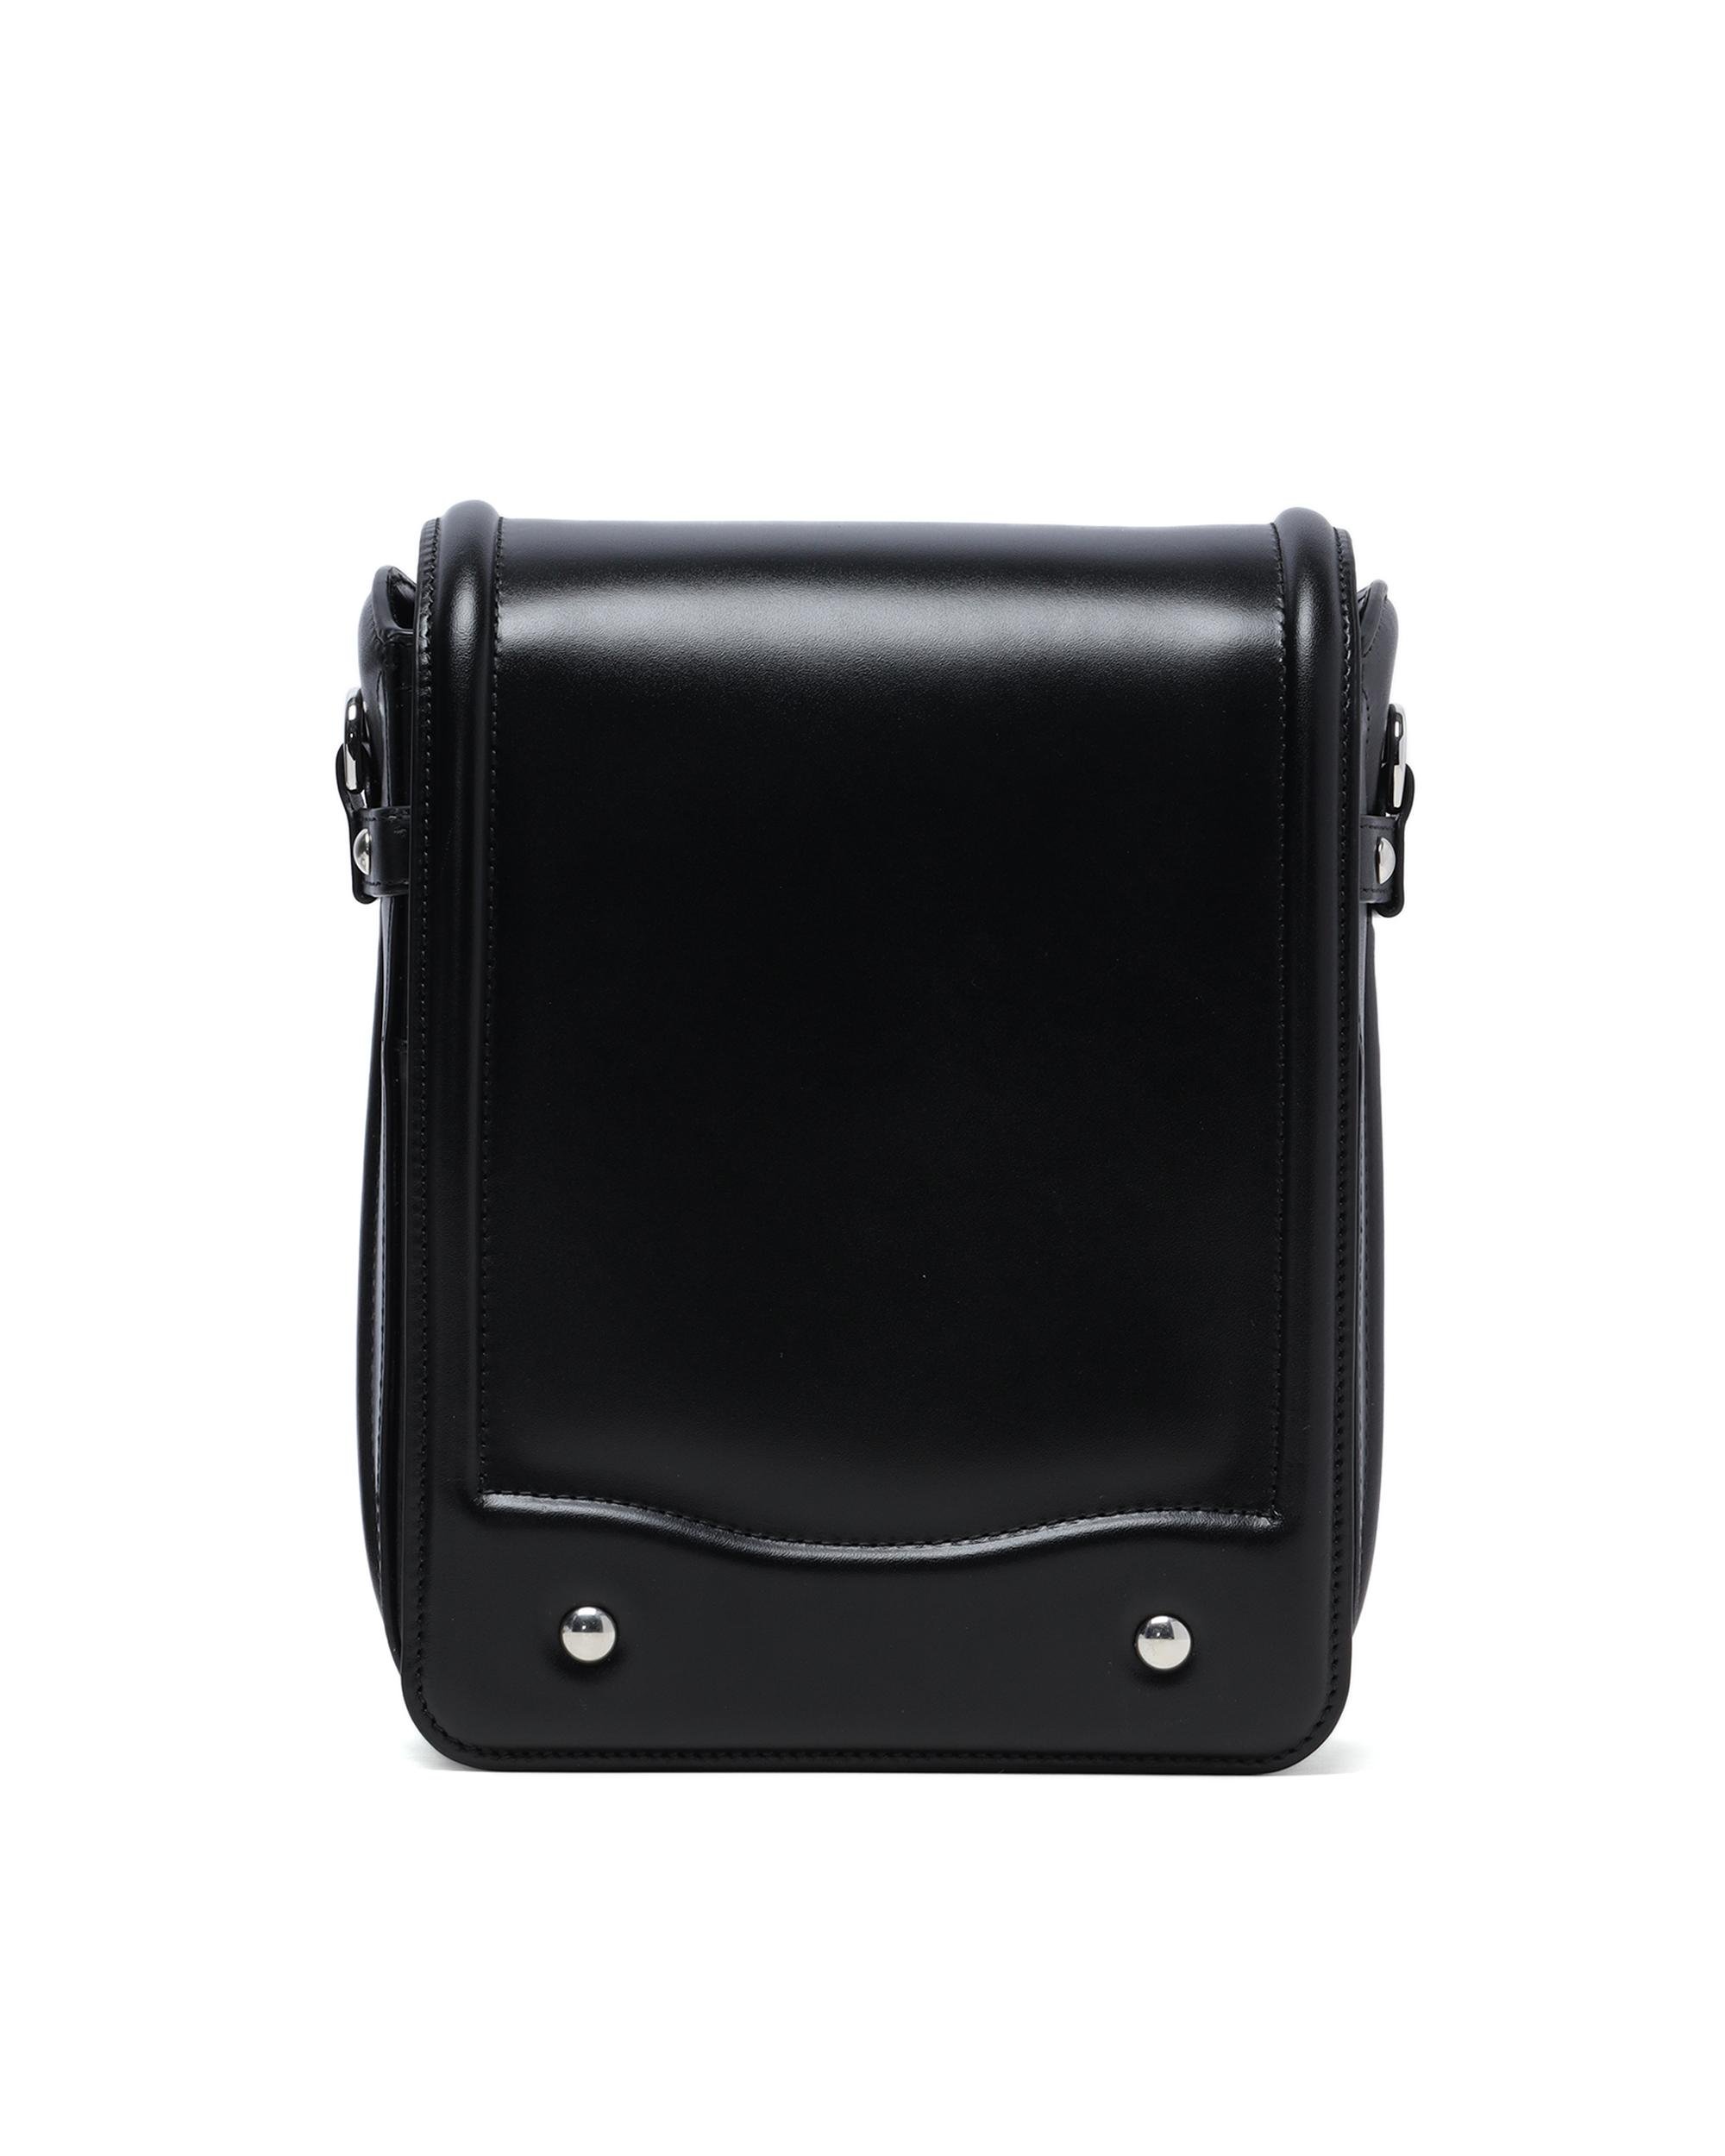 Ransel satchel classic by LEMAIRE